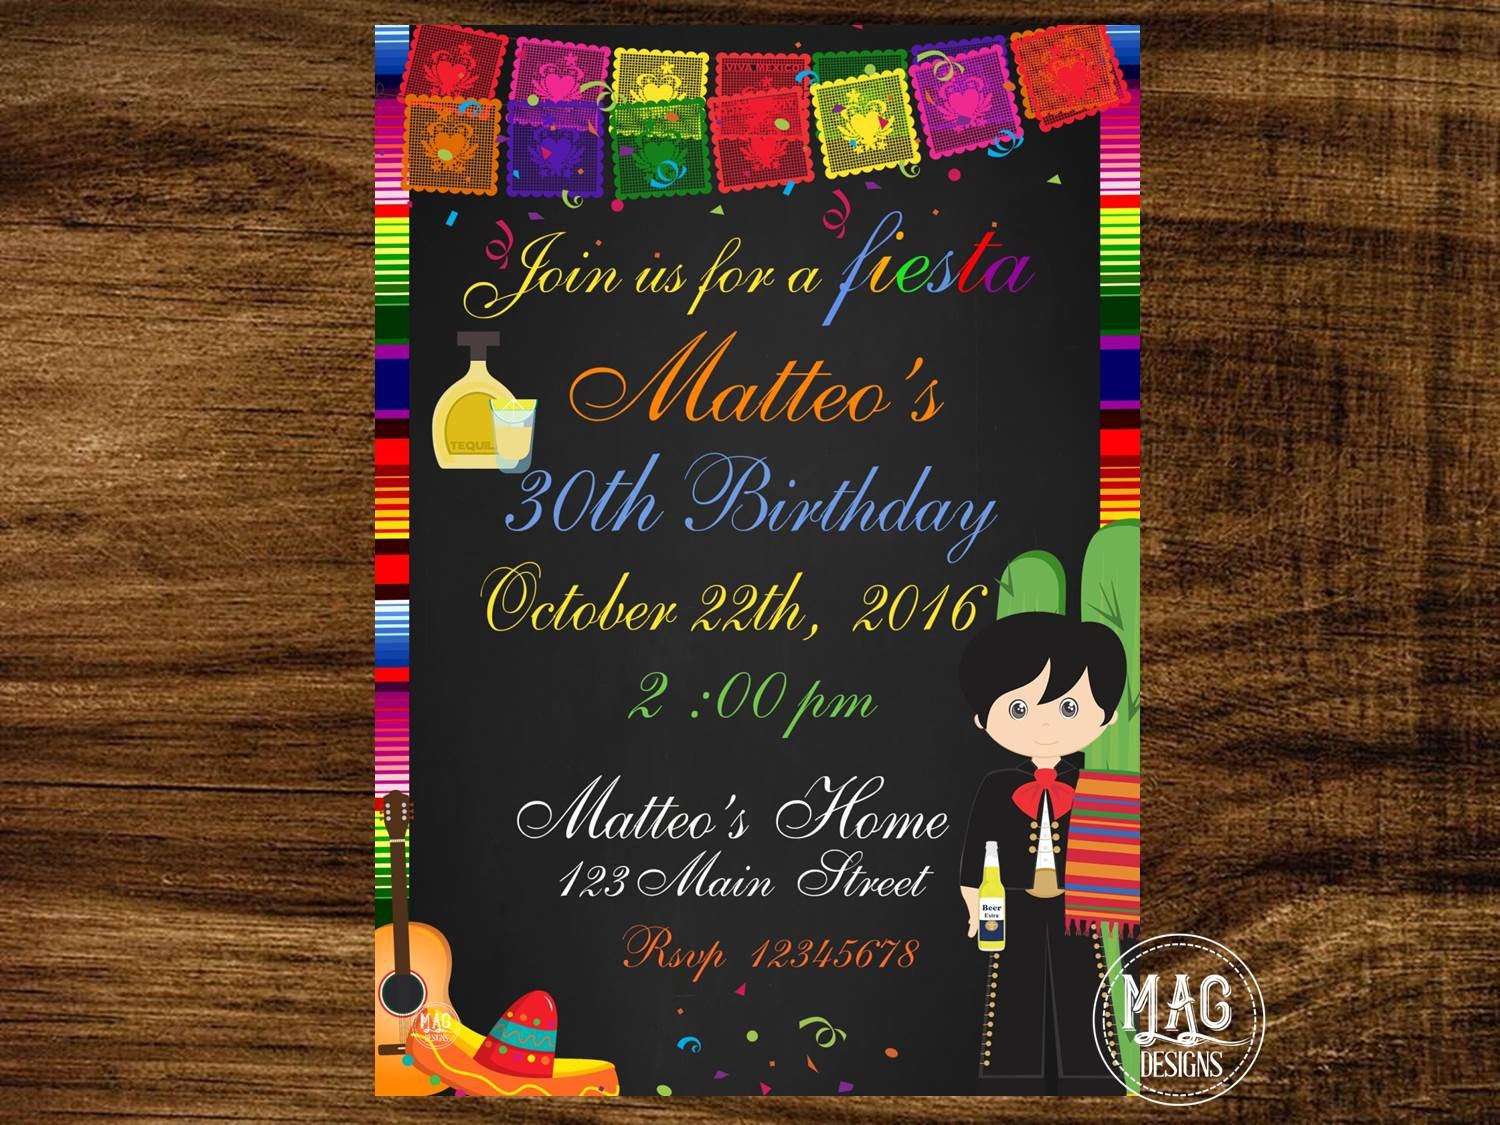 Mexican Theme Invitations Template Free